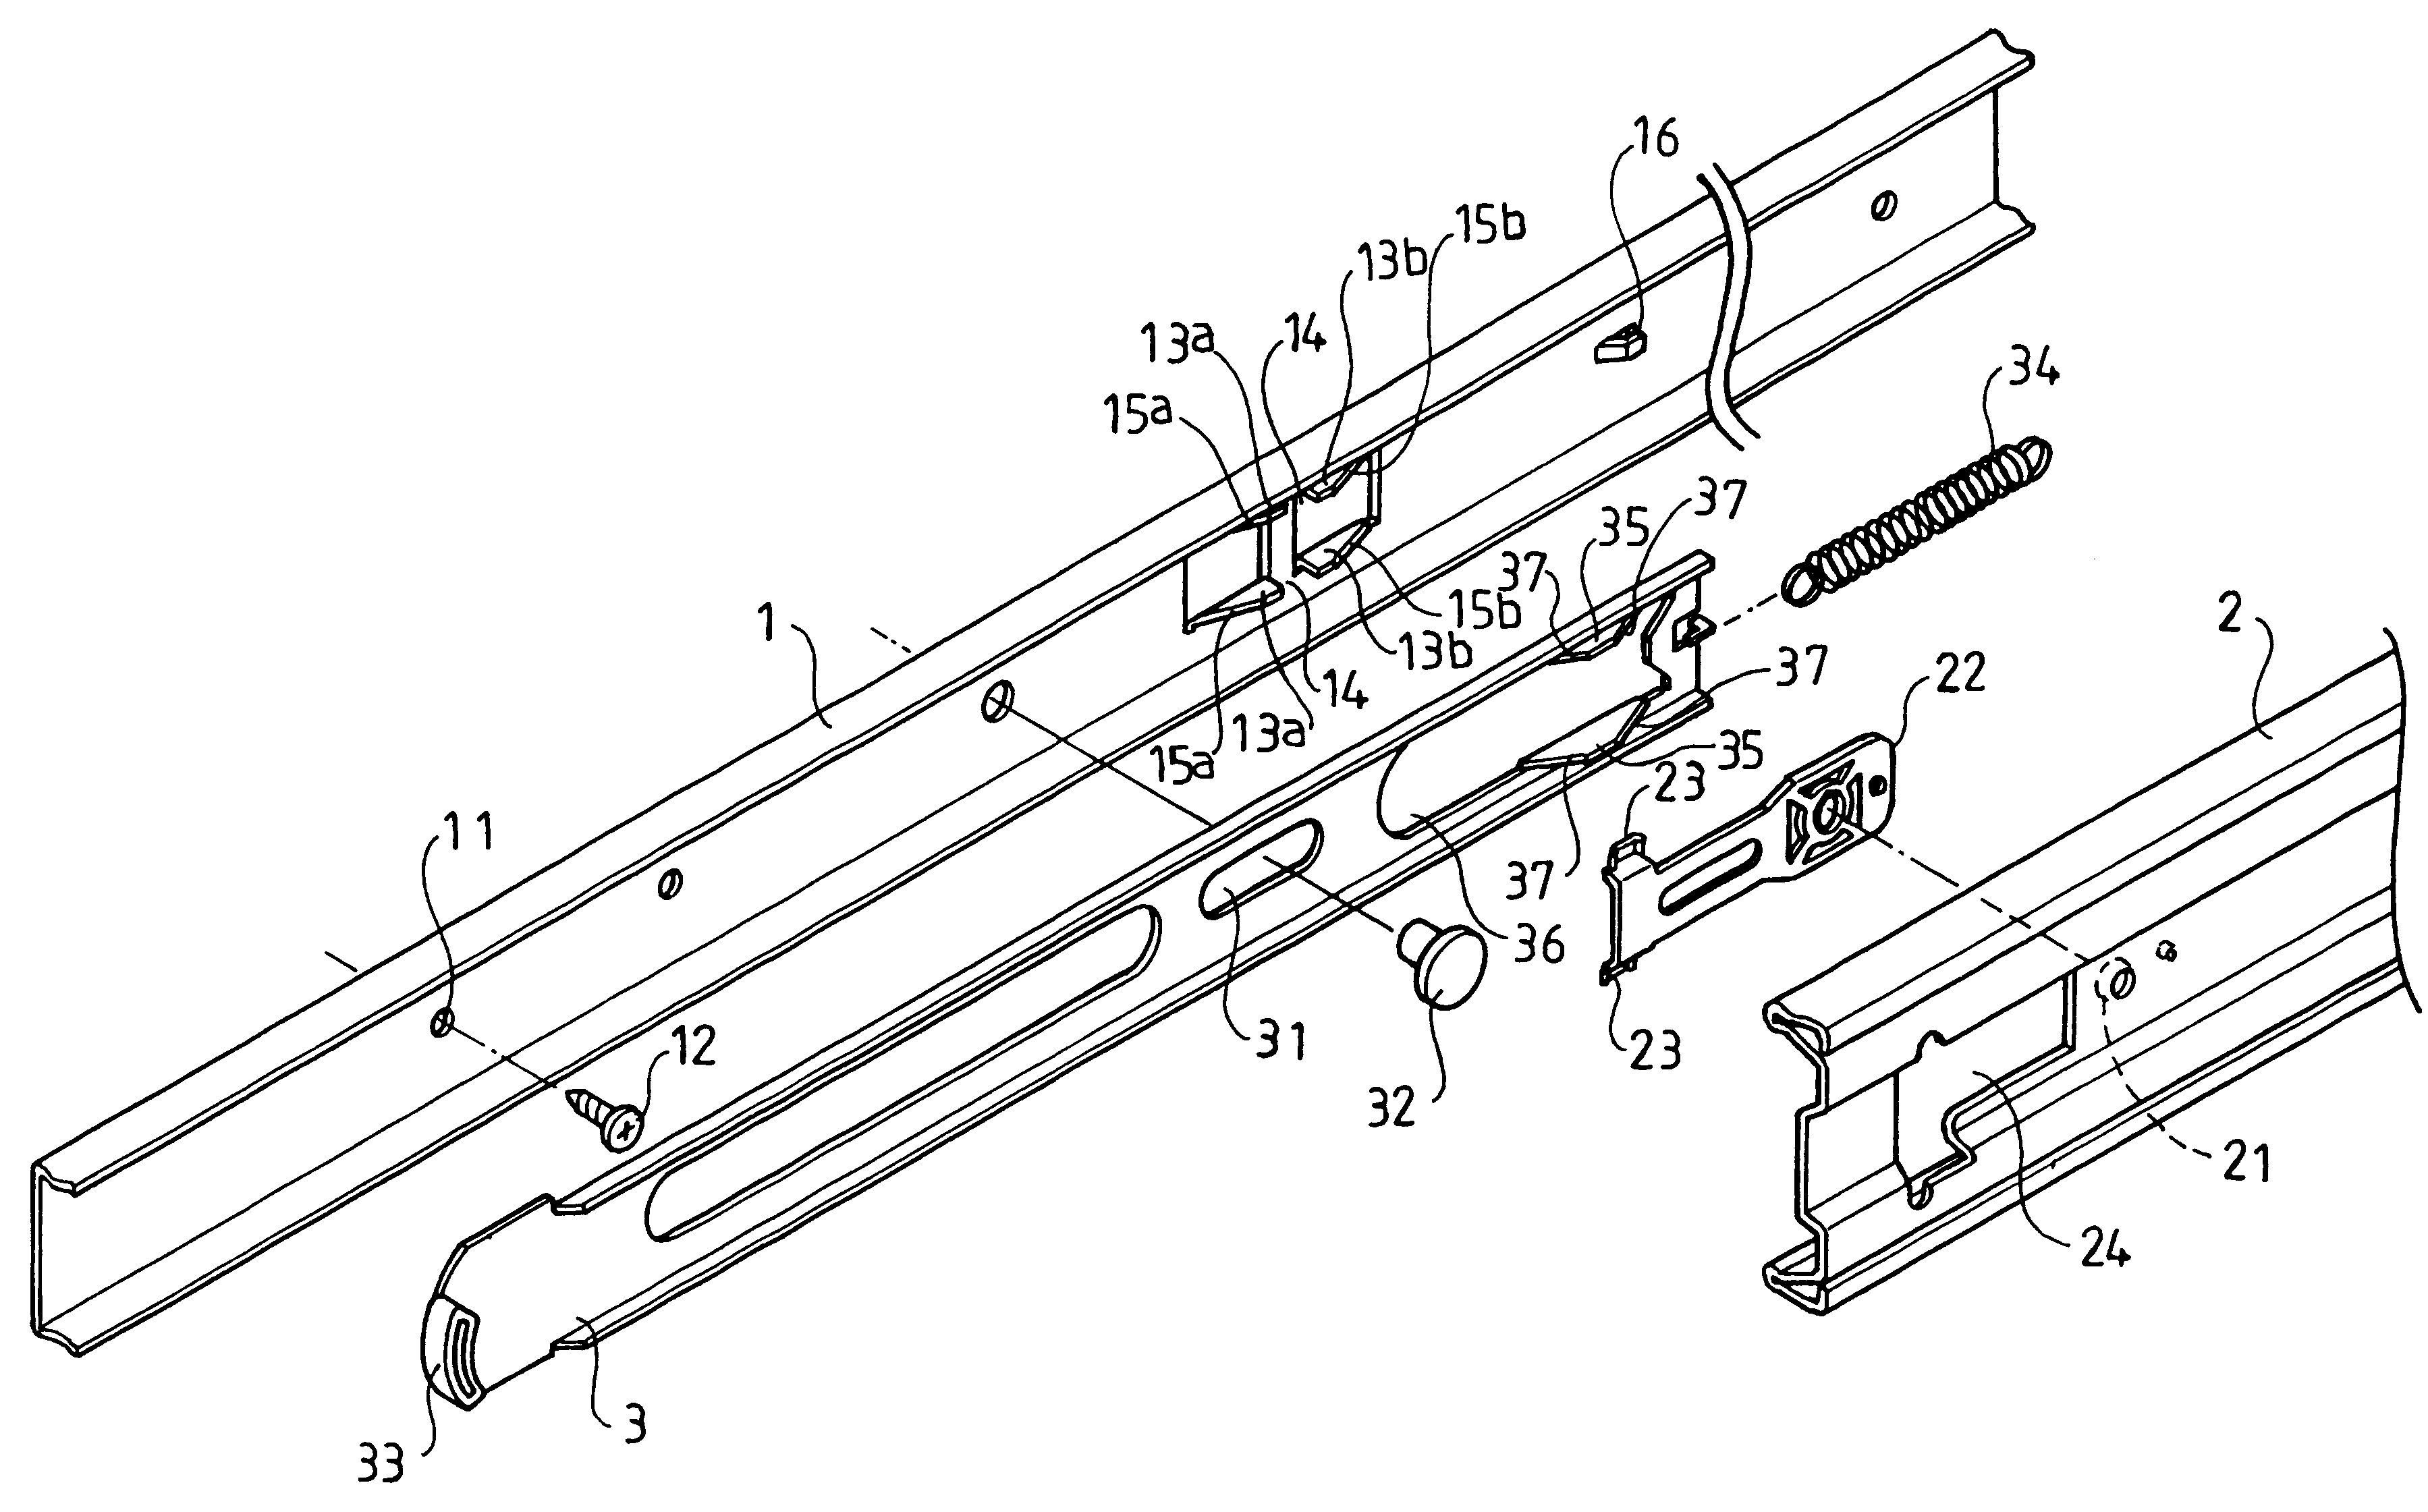 Lock snap structure of slide rail